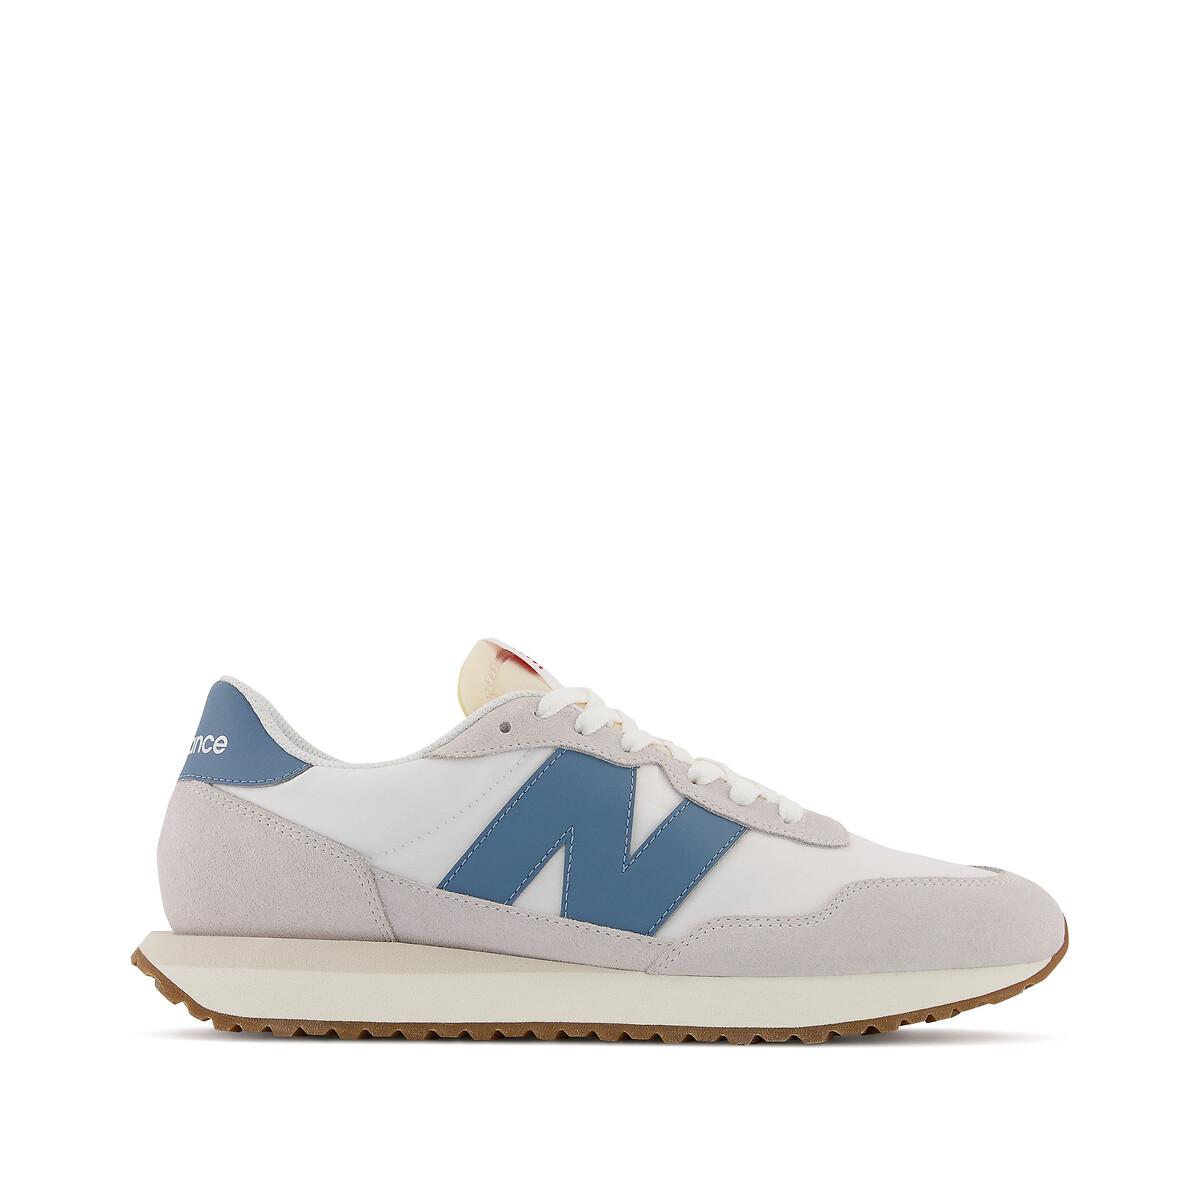 Ms237 suede trainers , grey/white, New Balance | La Redoute